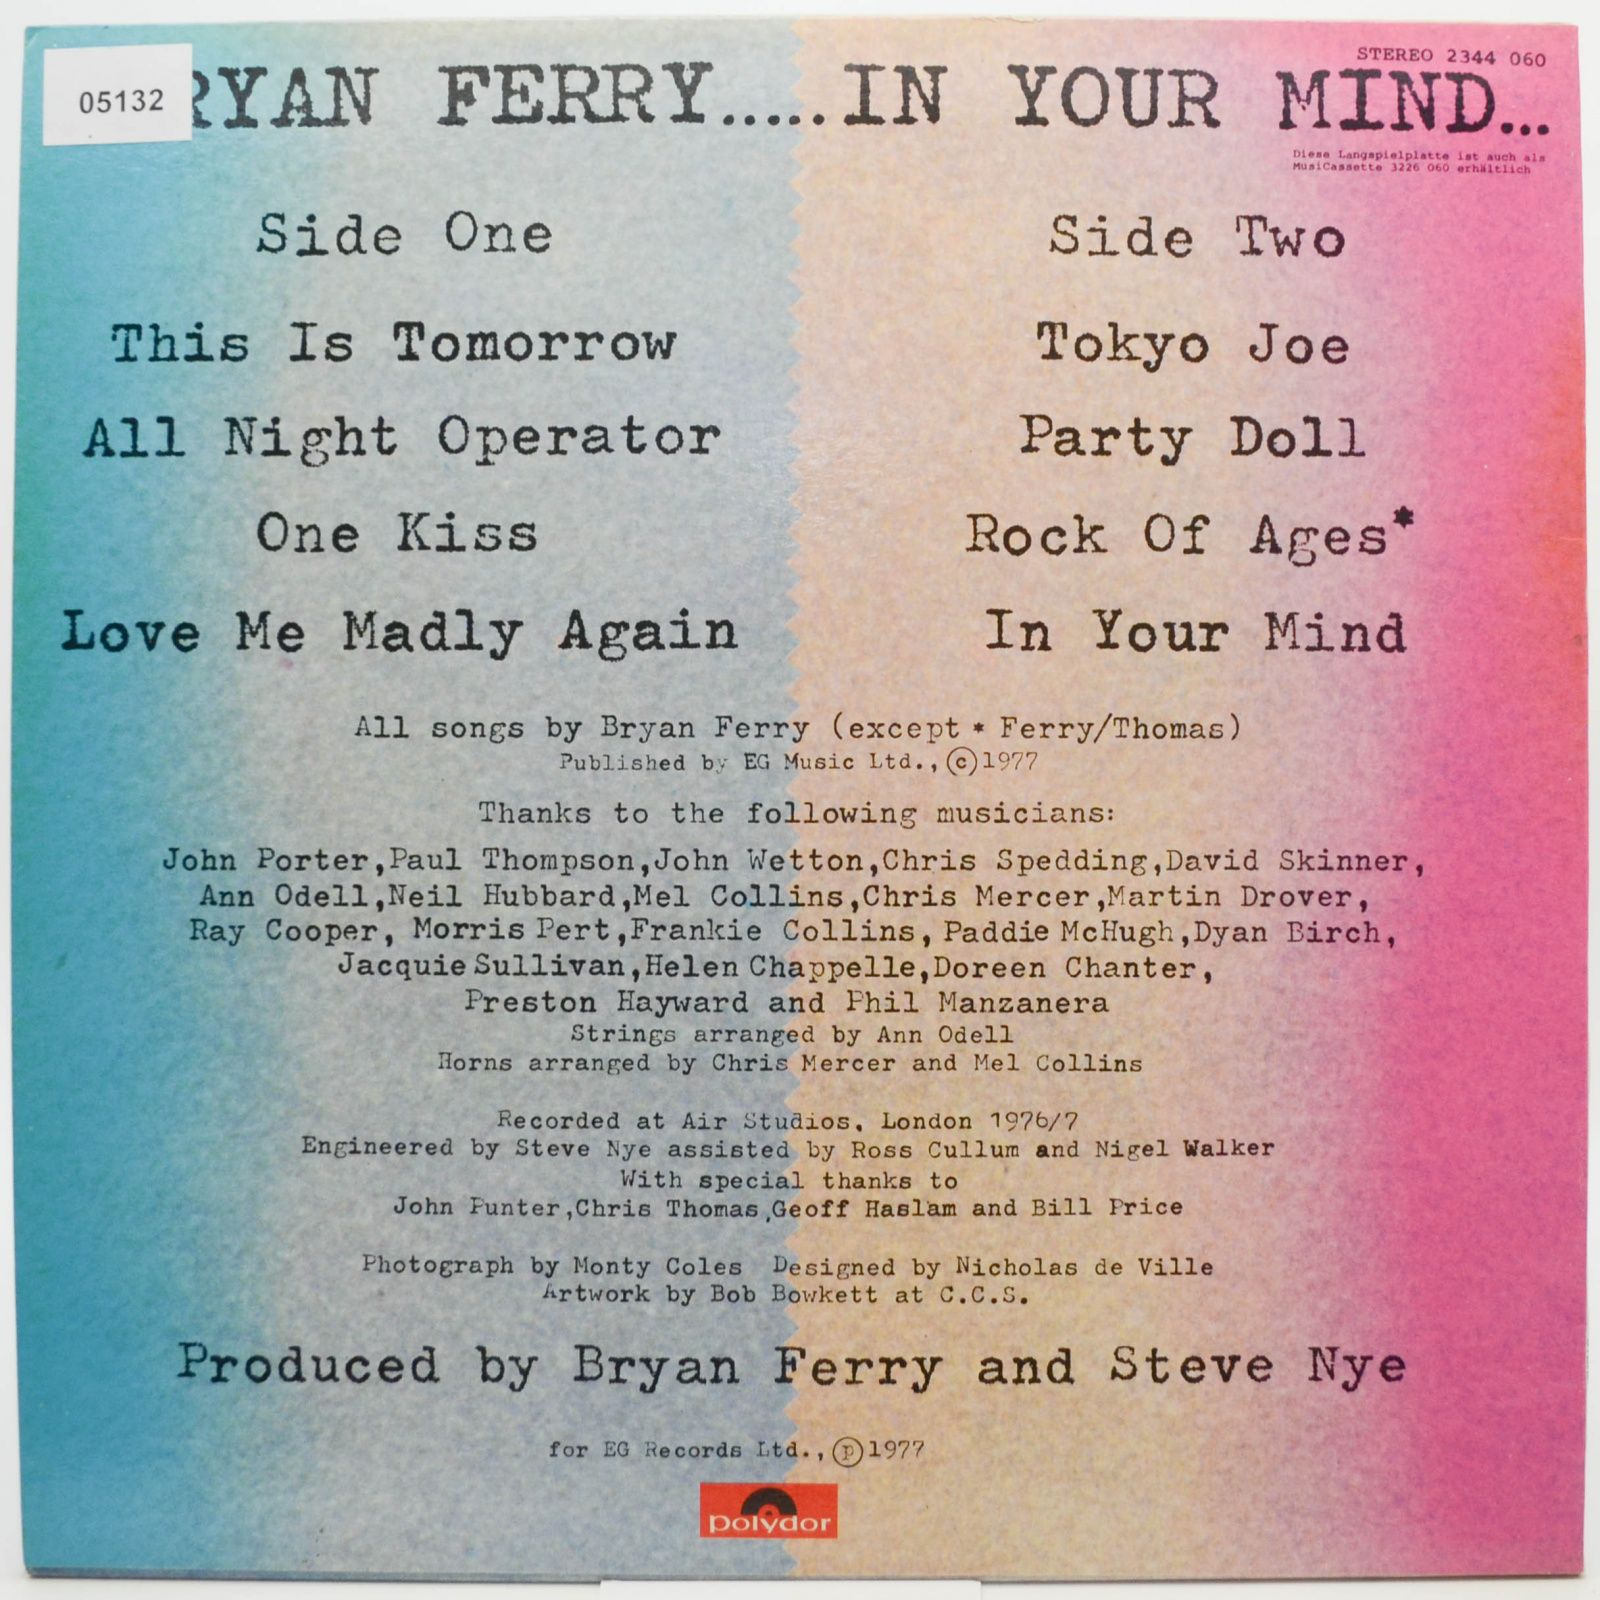 Bryan Ferry — In Your Mind, 1977